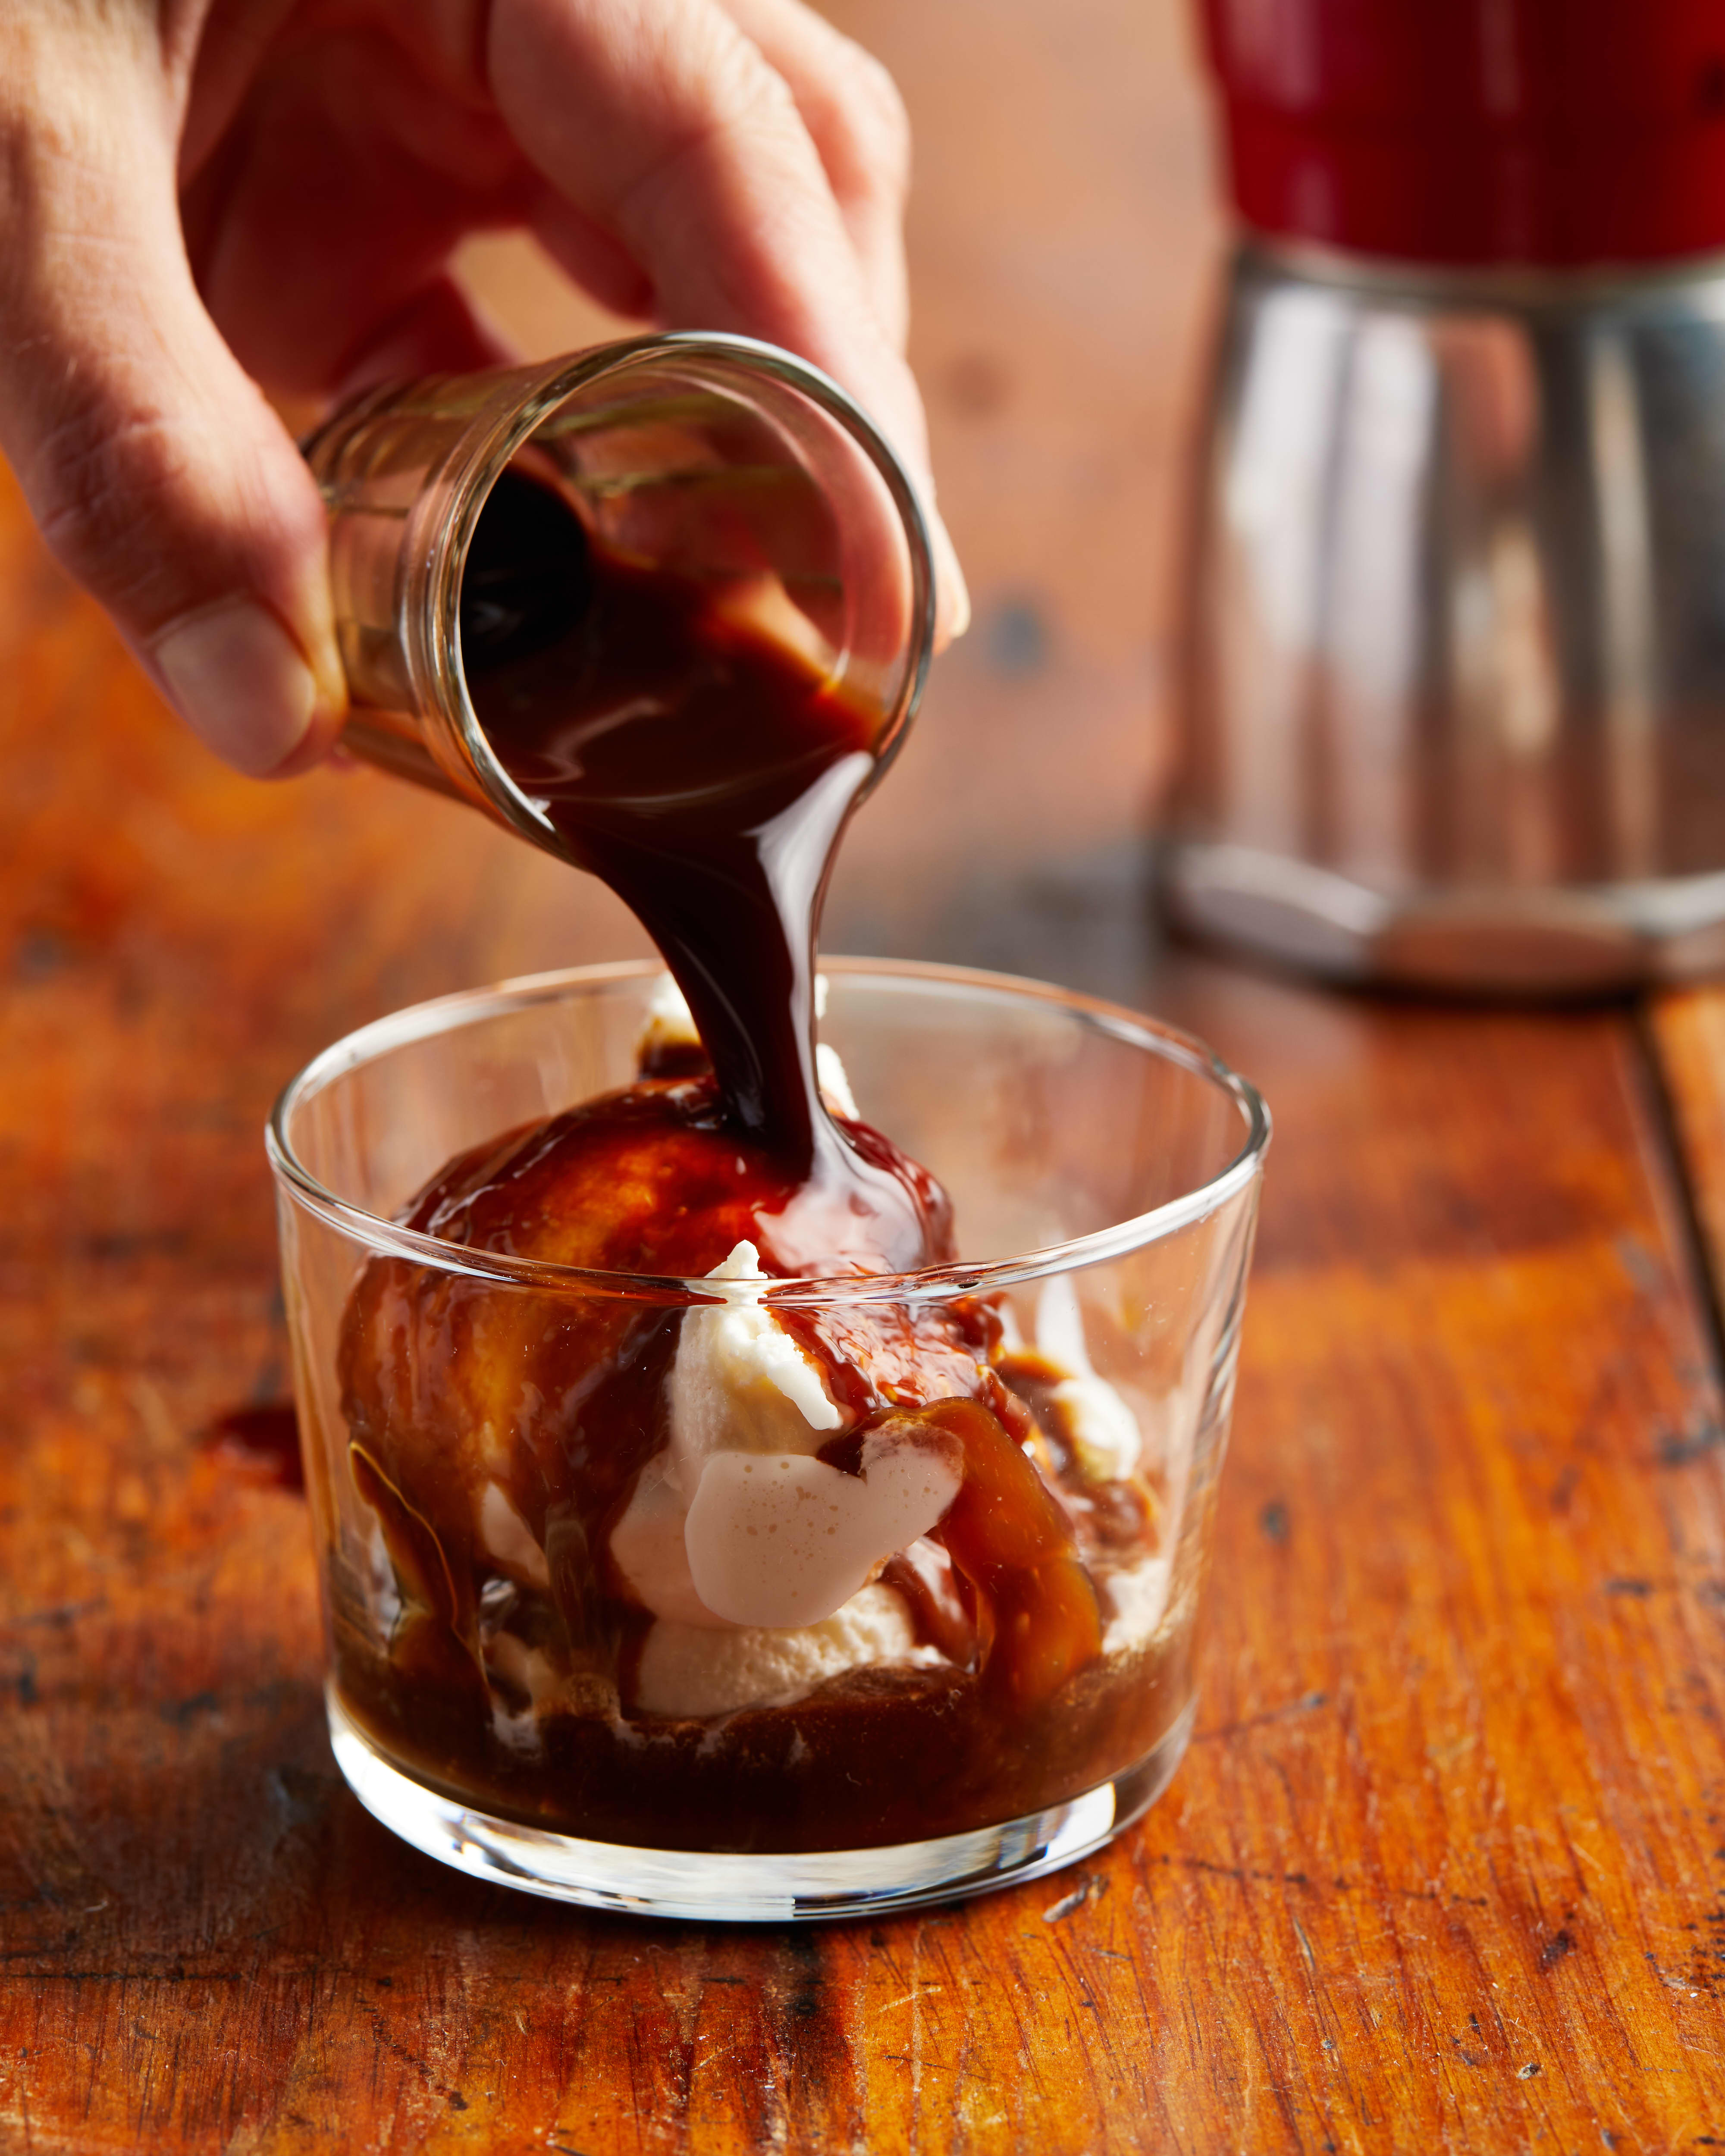 How To Make an Affogato at Home, Step by step Recipe